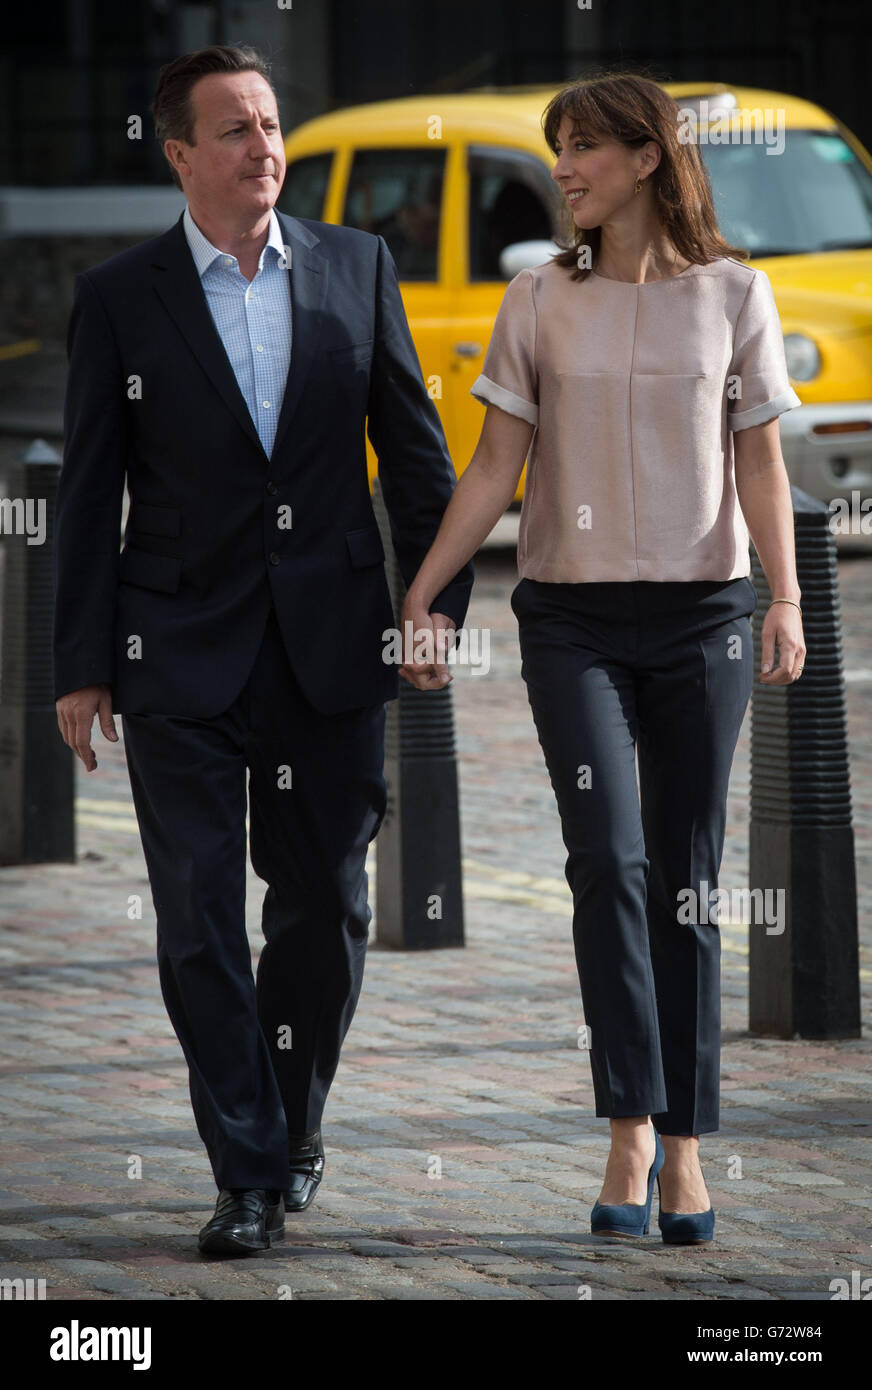 Prime Minister David Cameron and his wife Samantha arrive at Methodist Central Hall in Westminster to vote. Polling has opened across Britain as millions of voters cast their ballots in European and local council elections. Stock Photo